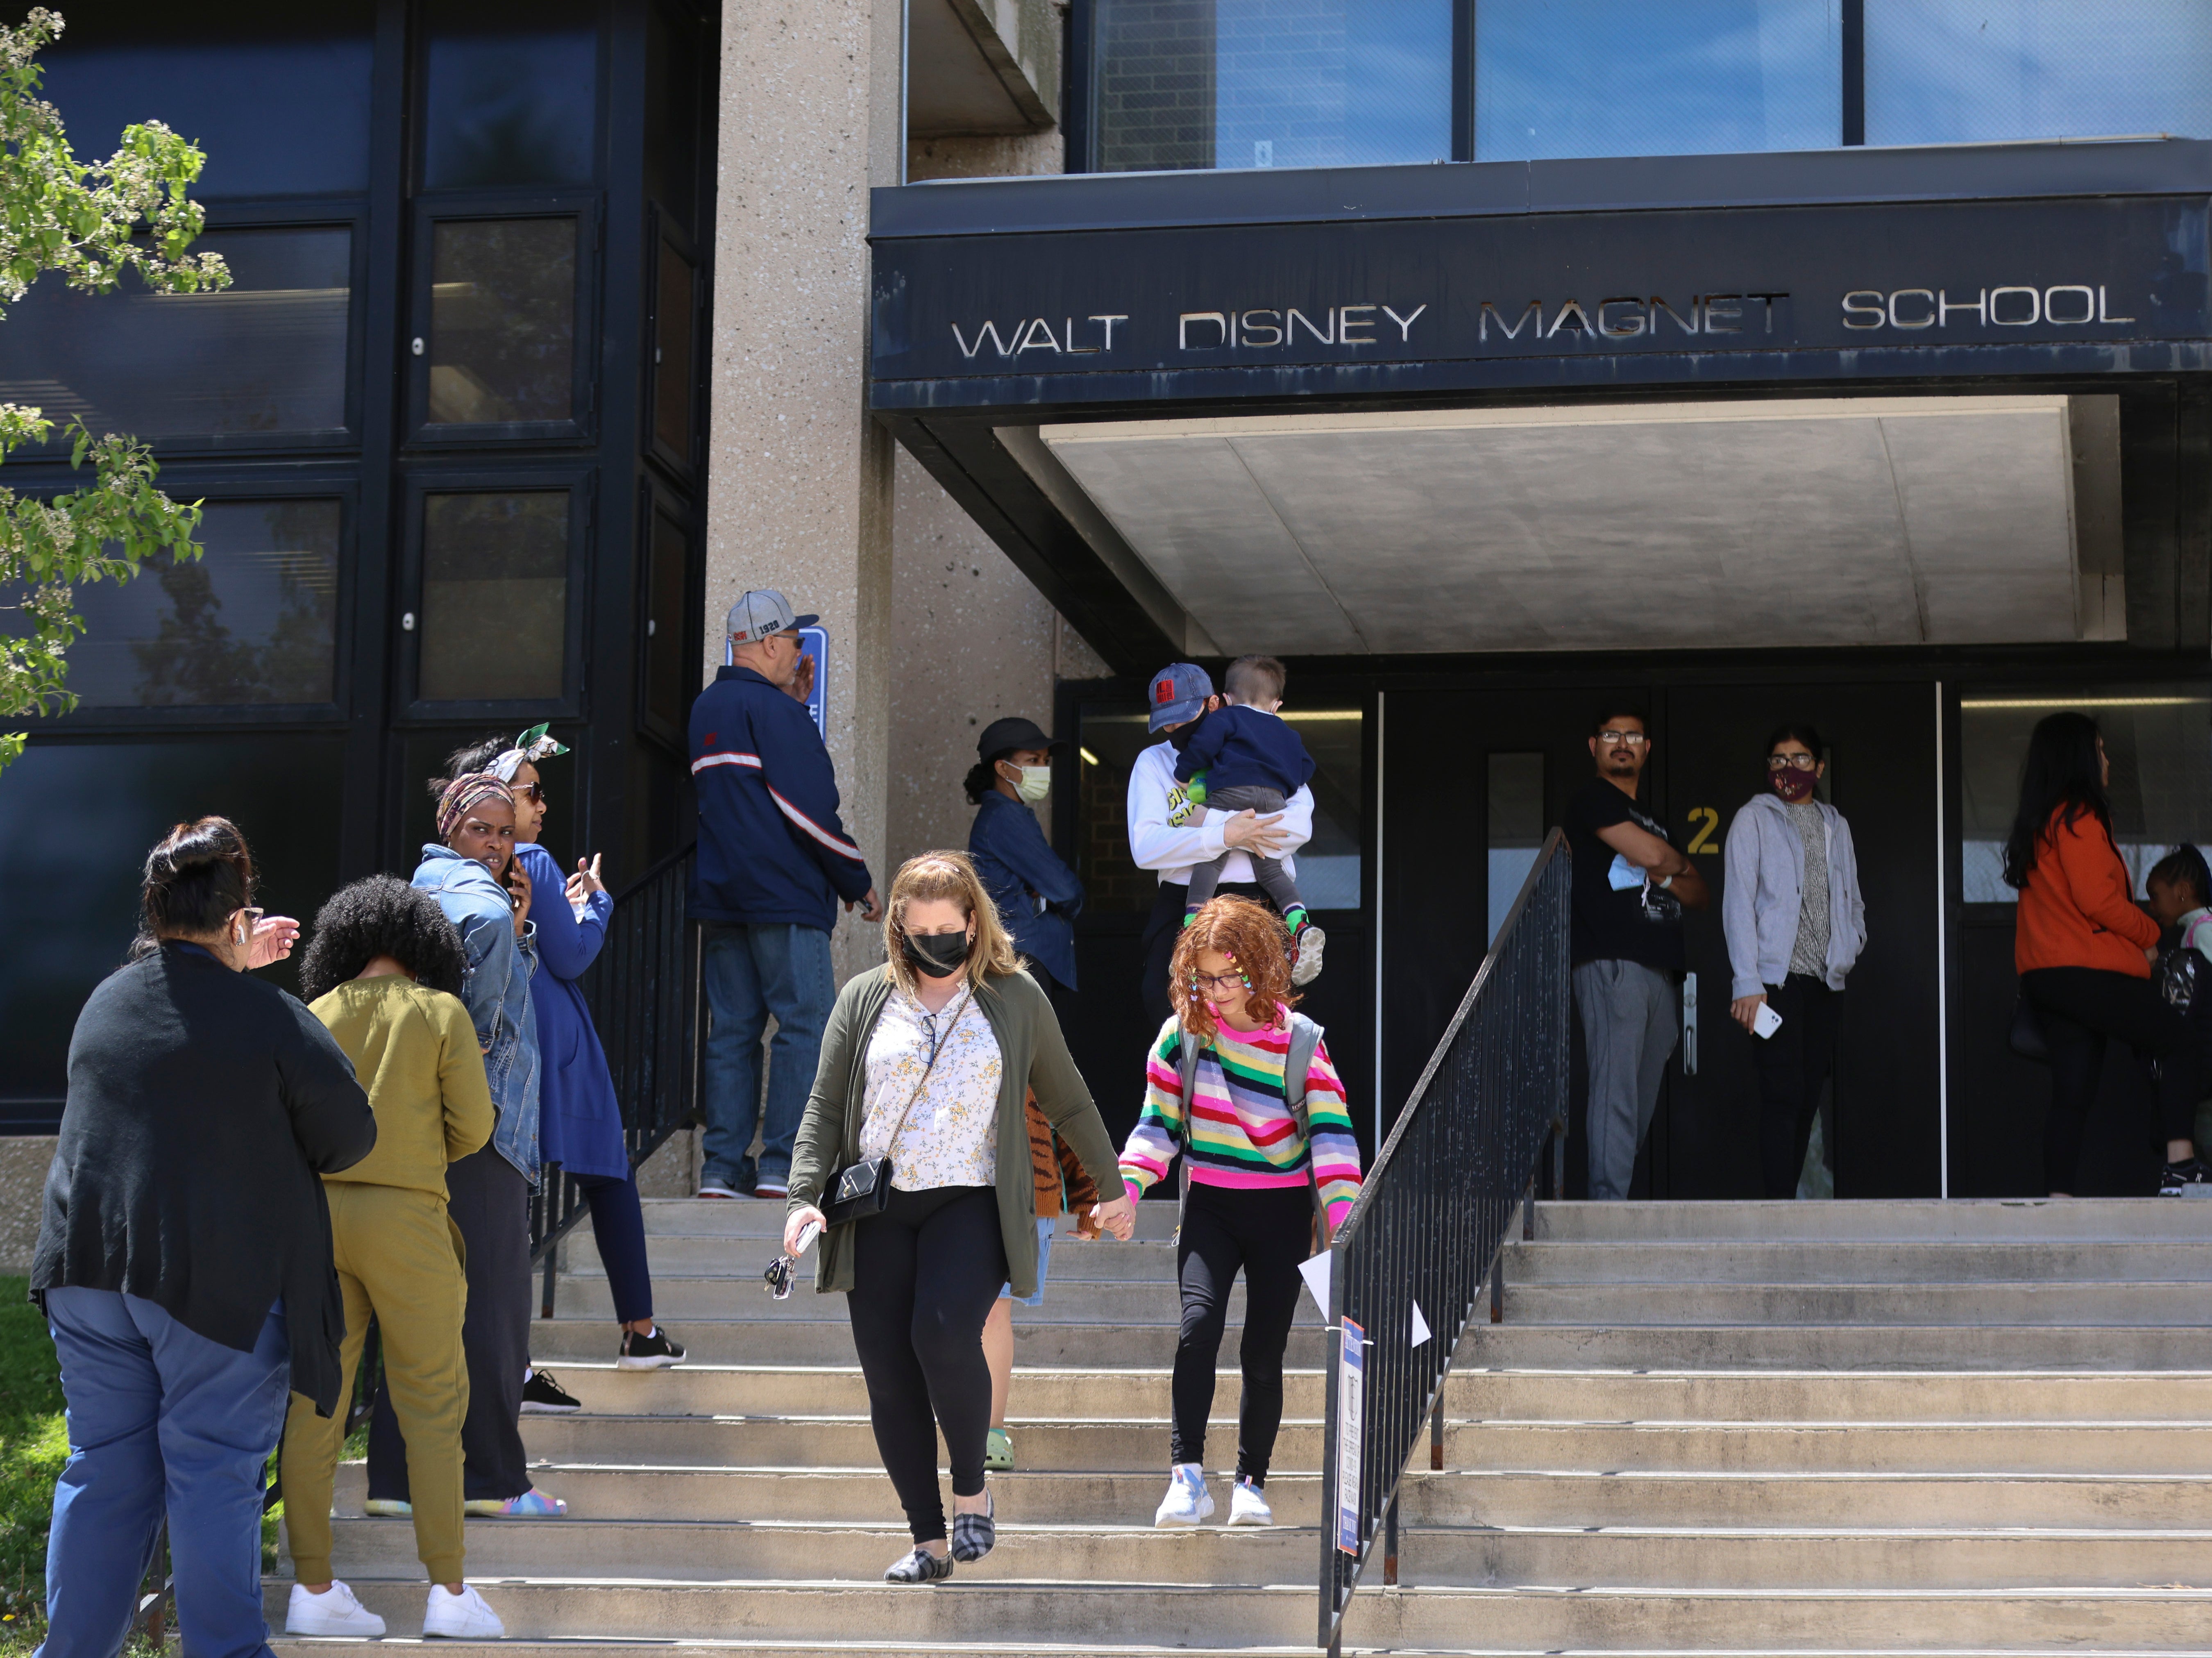 Parents wait to pick up their children at Walt Disney Magnet School in Chicago on Tuesday